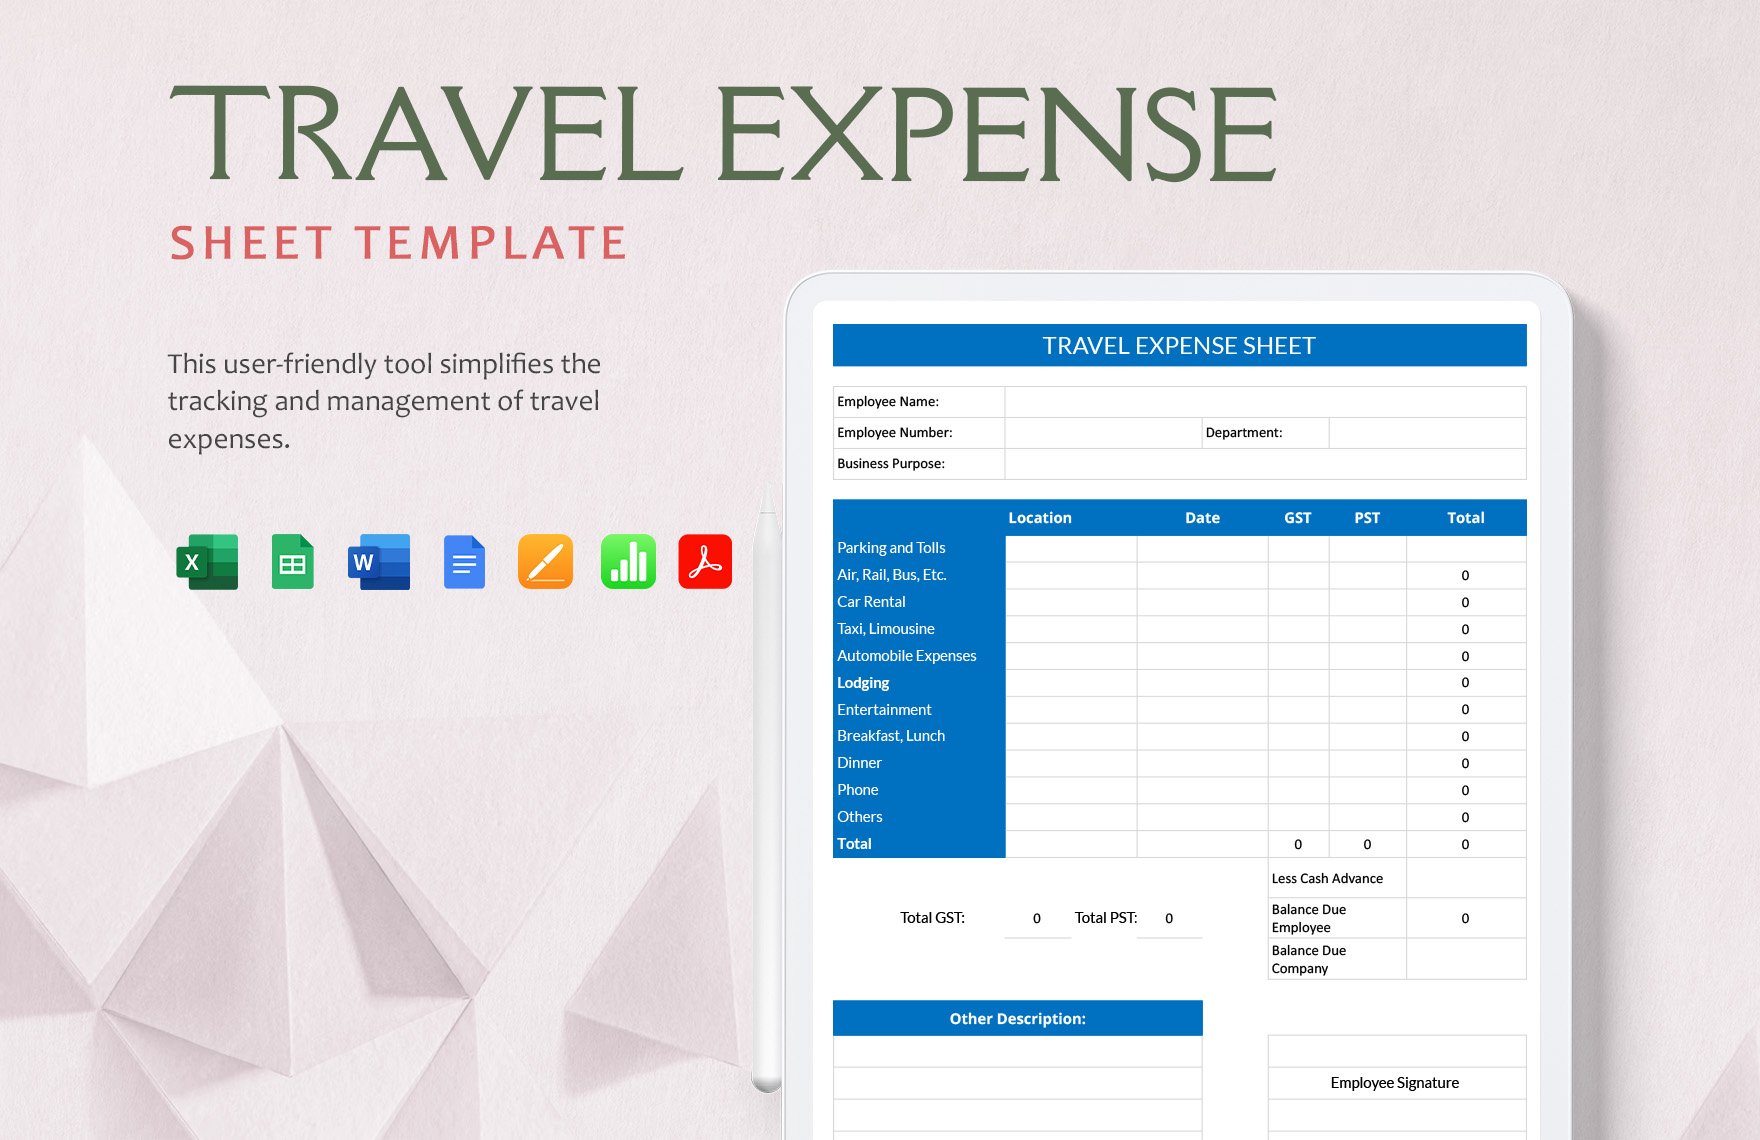 Travel Expense Sheet Template in Word, Google Docs, Excel, PDF, Google Sheets, Apple Pages, Apple Numbers